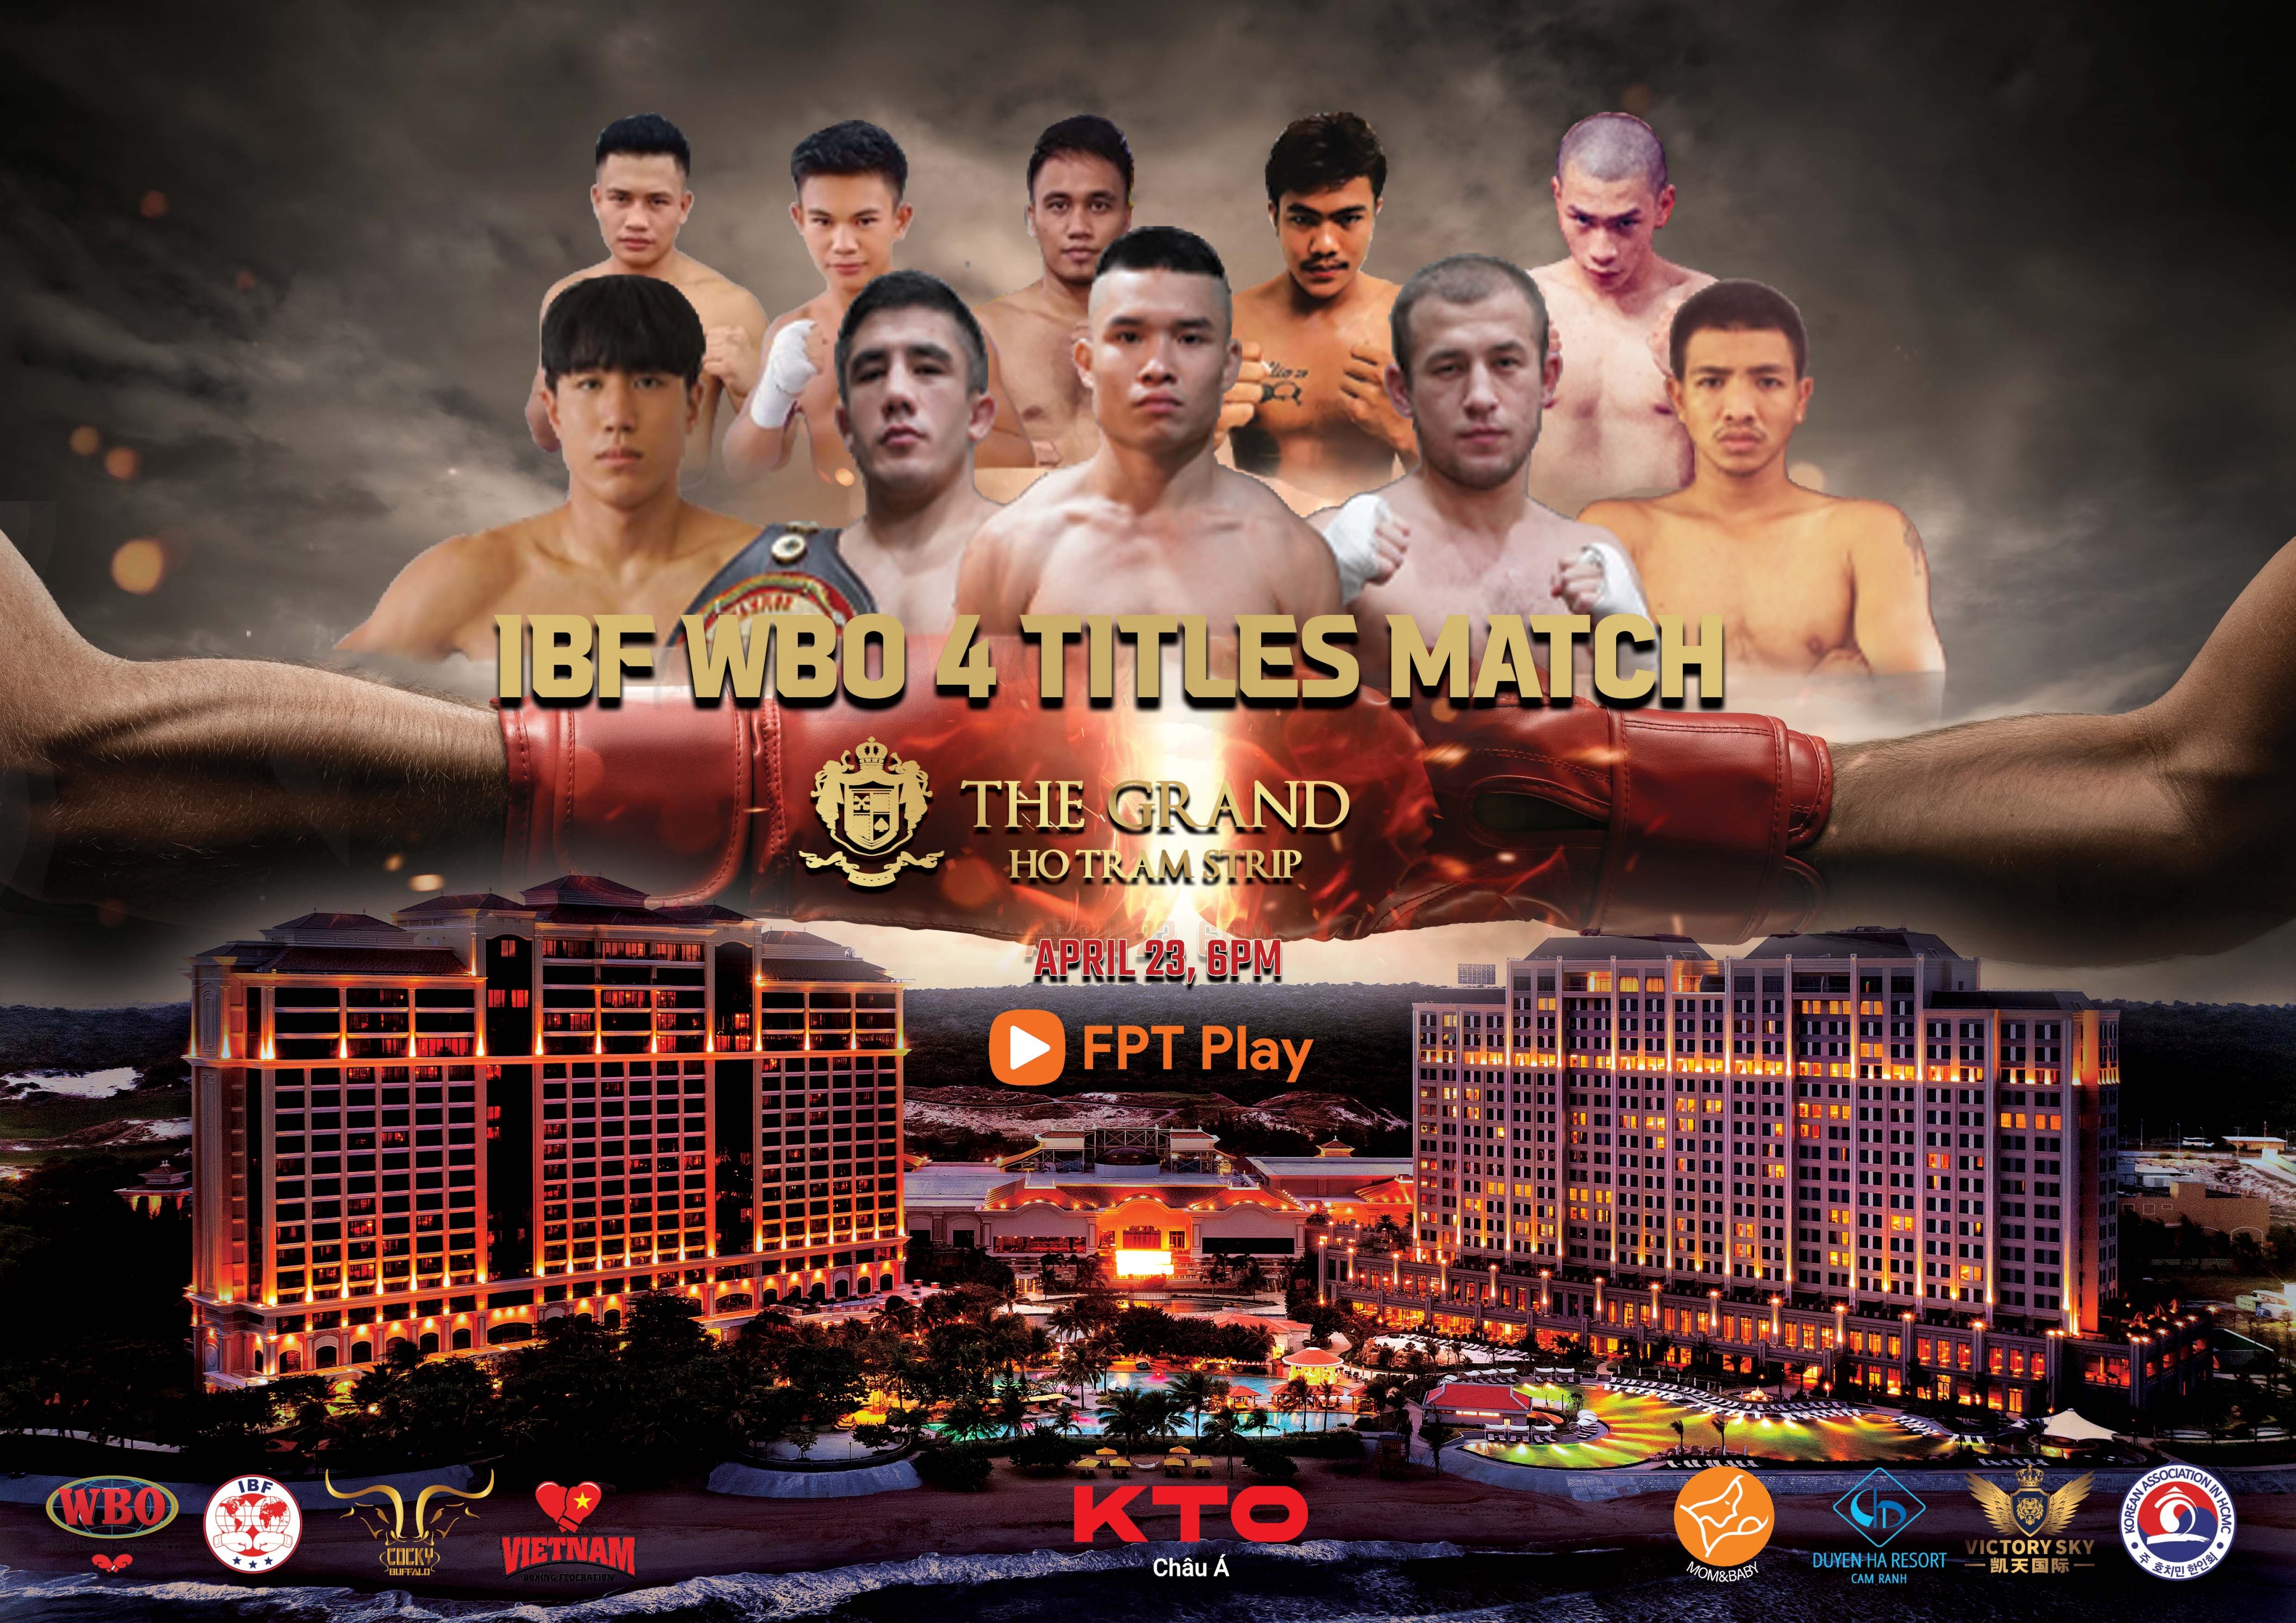 Dinh Hong Quan (front, center) with nine other fighters who compete in the IBF and WBO titles event on April 23, 2022. Photo: Cocky Buffalo